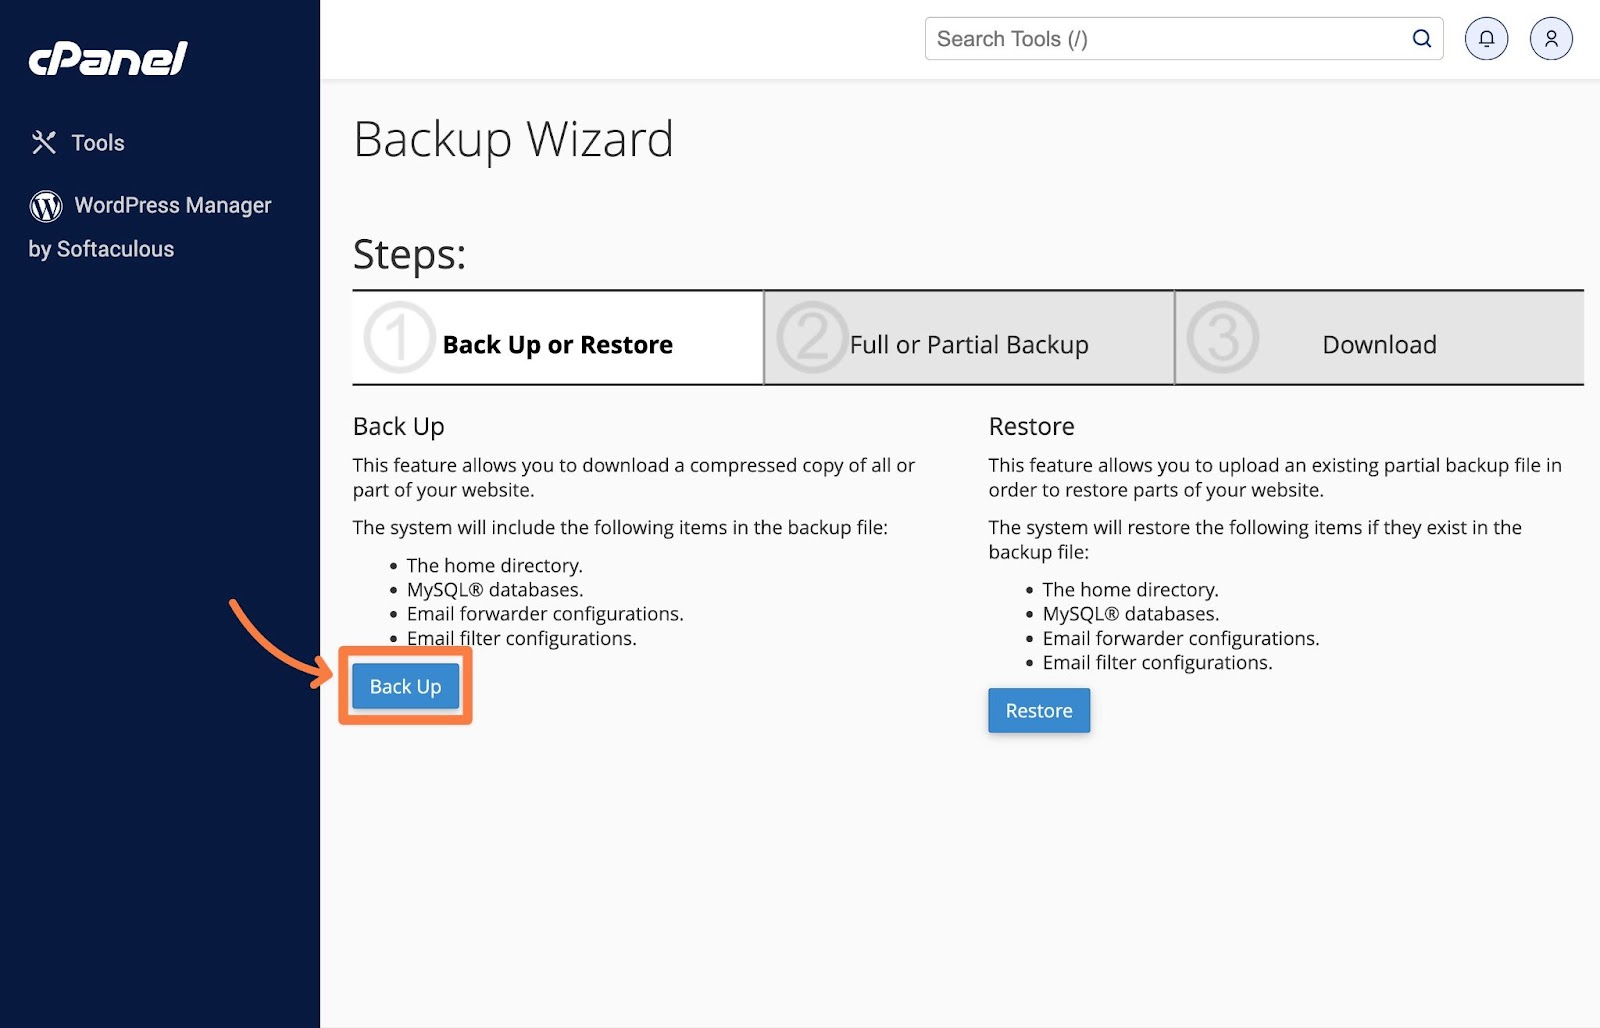 How to start a backup in cPanel Backup Wizard.